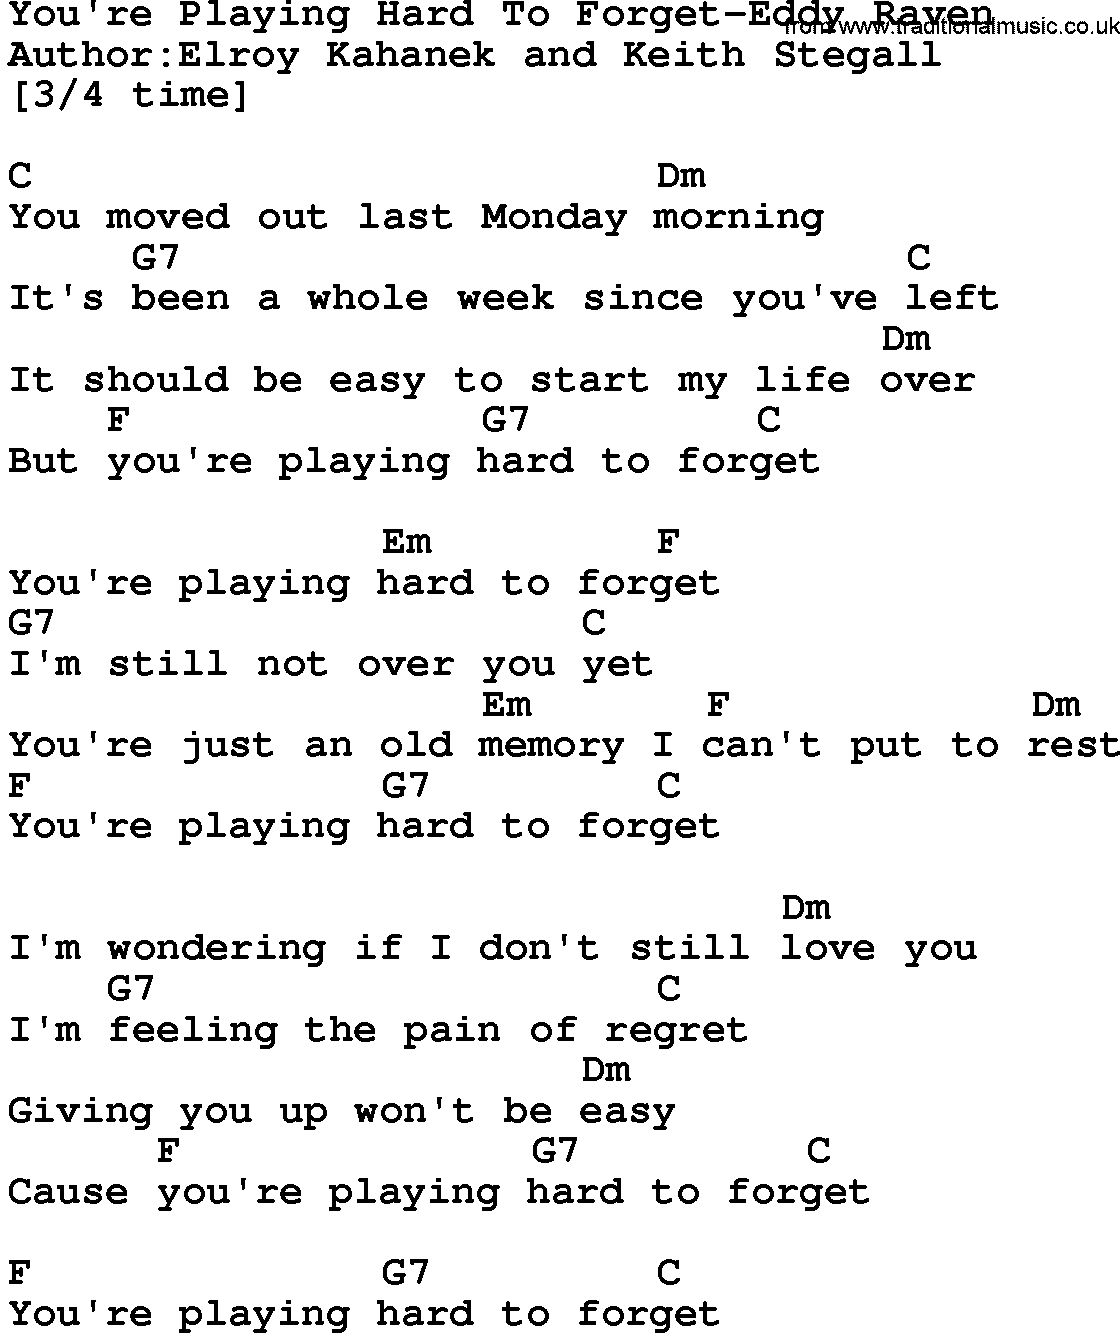 Country music song: You're Playing Hard To Forget-Eddy Raven lyrics and chords